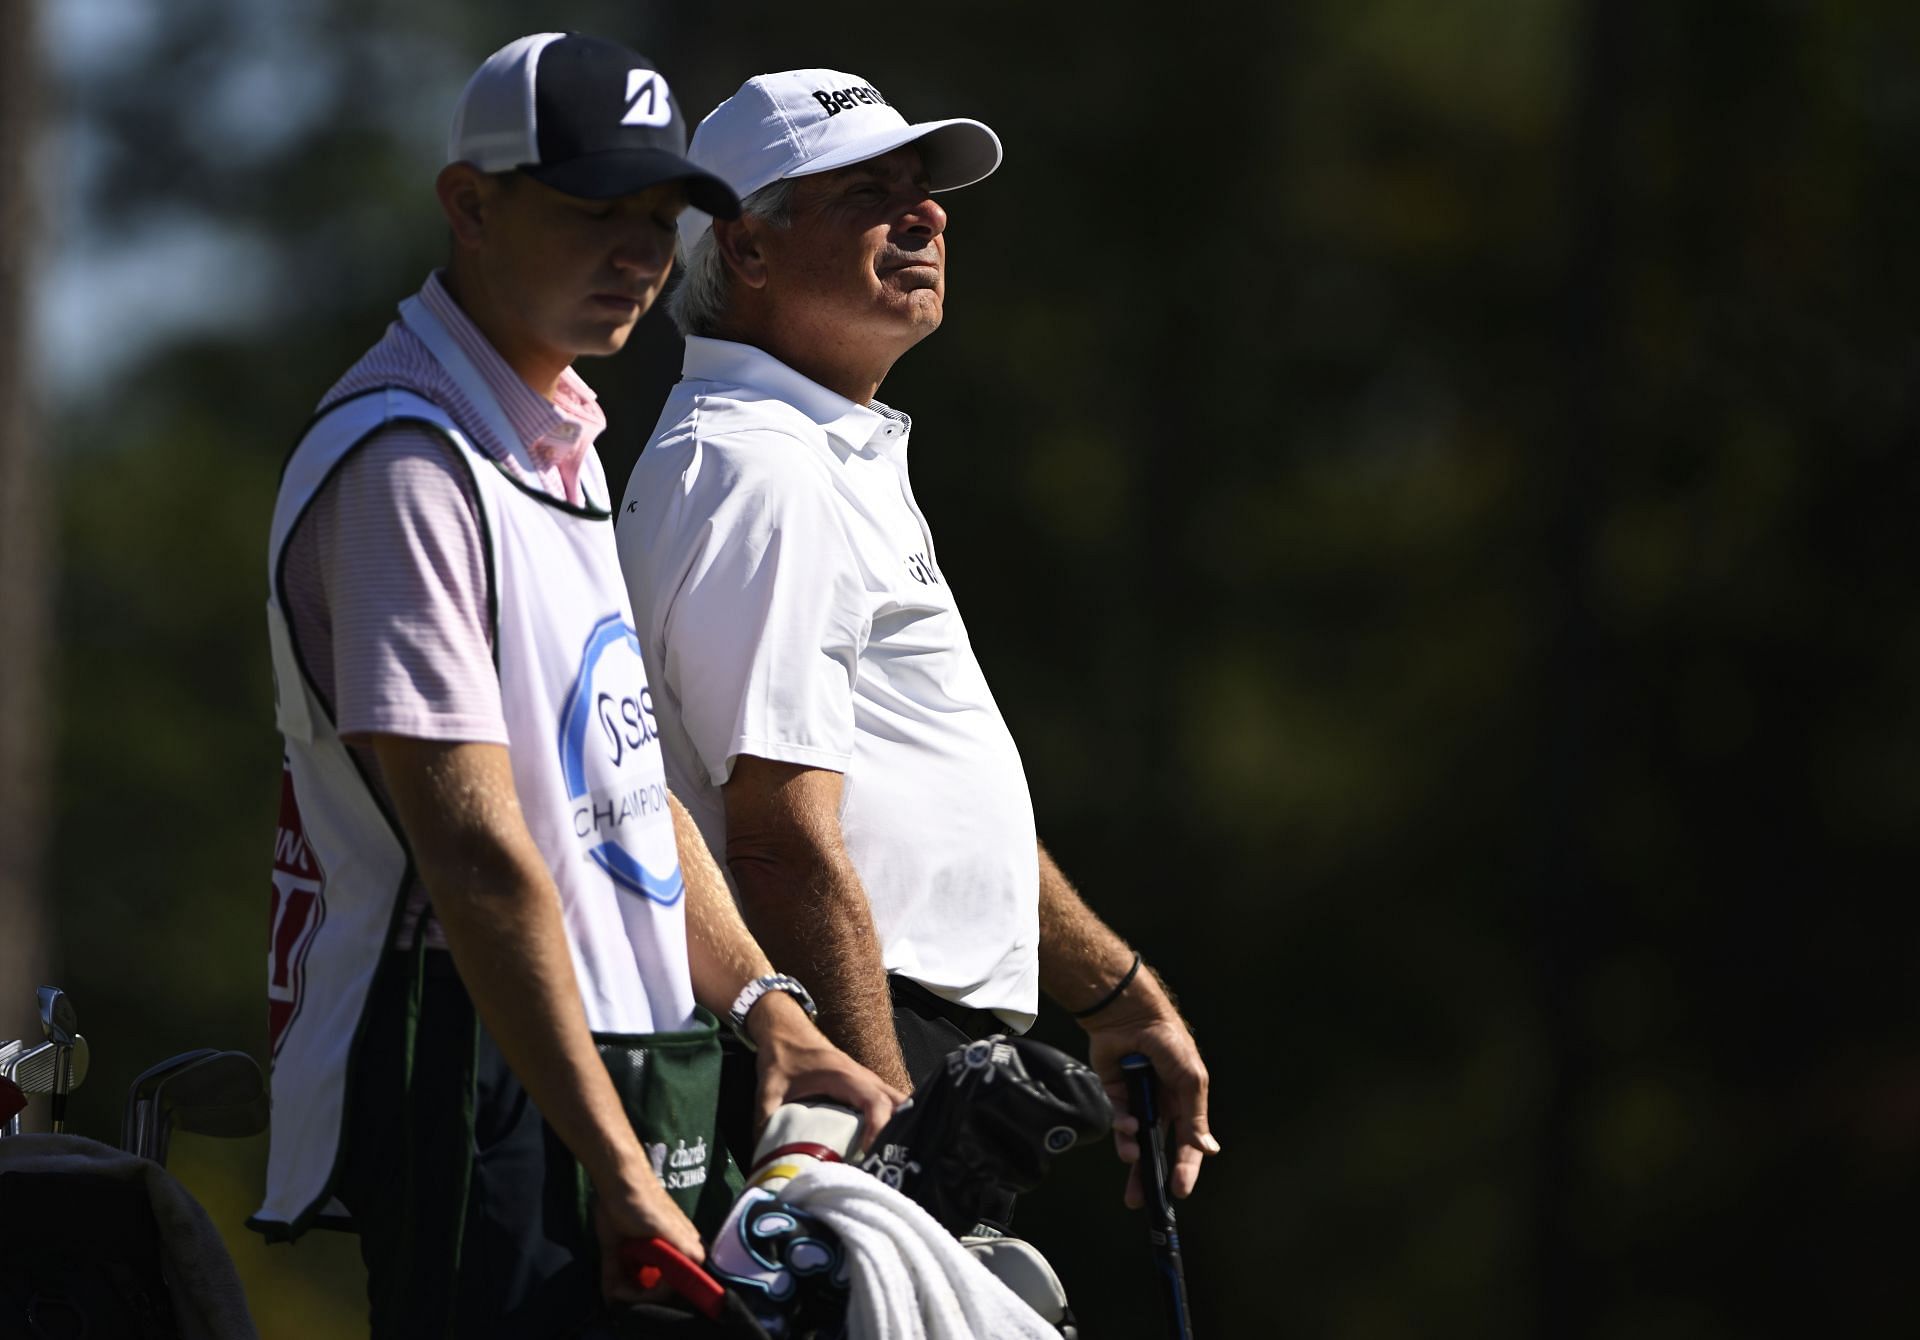 Who was Fred Couples' caddie this week at SAS Championship?